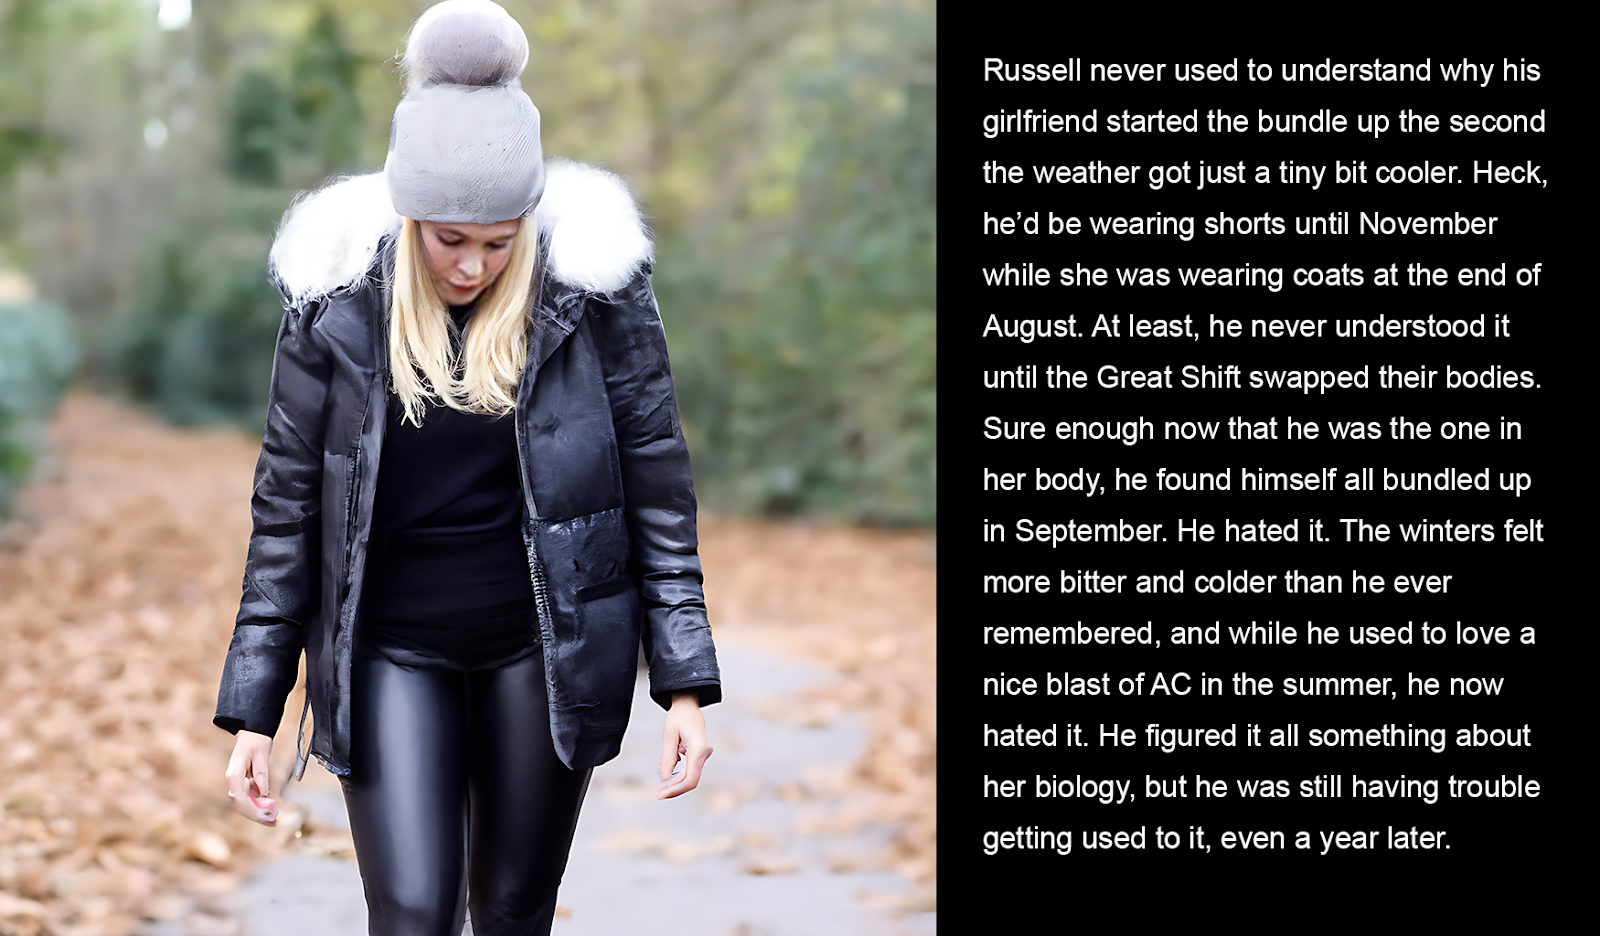 Russell never used to understand why his girlfriend started the bundle up the second the weather got just a tiny bit cooler. Heck, he’d be wearing shorts until November while she was wearing coats at the end of August. At least, he never understood it until the Great Shift swapped their bodies. Sure enough now that he was the one in her body, he found himself all bundled up in September. He hated it. The winters felt more bitter and colder than he ever remembered, and while he used to love a nice blast of AC in the summer, he now hated it. He figured it all something about her biology, but he was still having trouble getting used to it, even a year later.